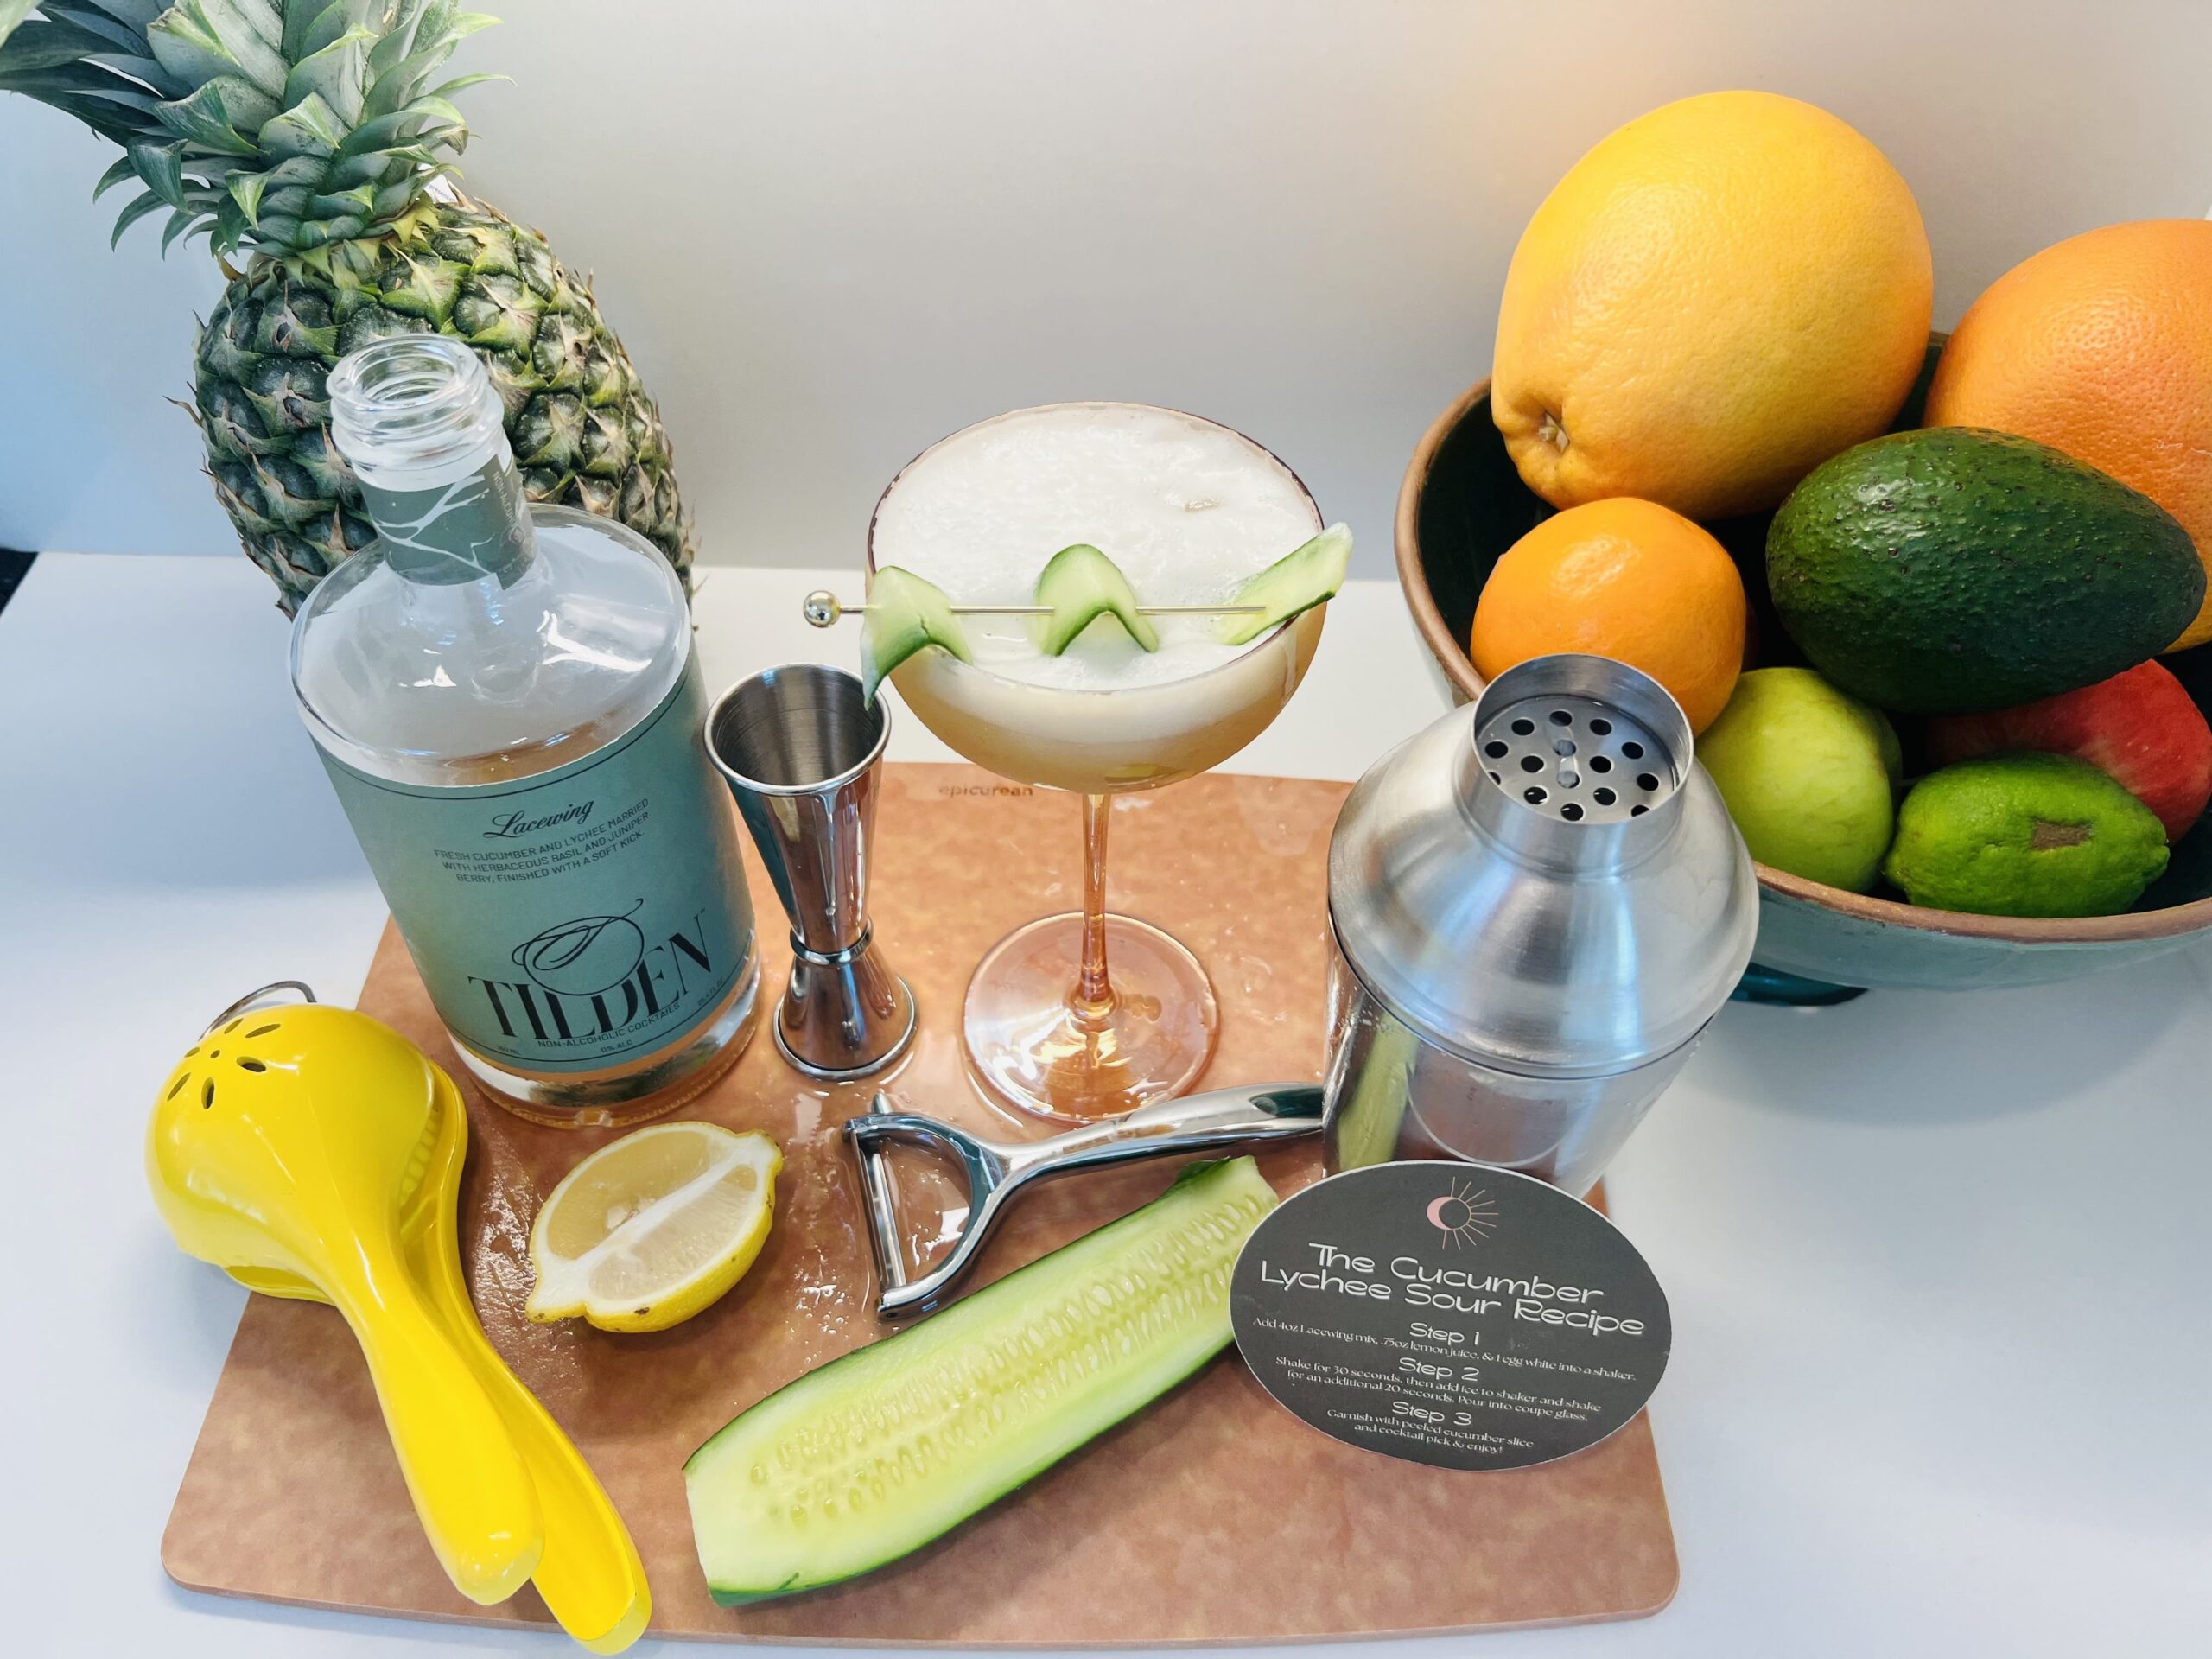 My Dri/kit Review: Elegant Non-Alcoholic Cocktail Kits and Gift Sets